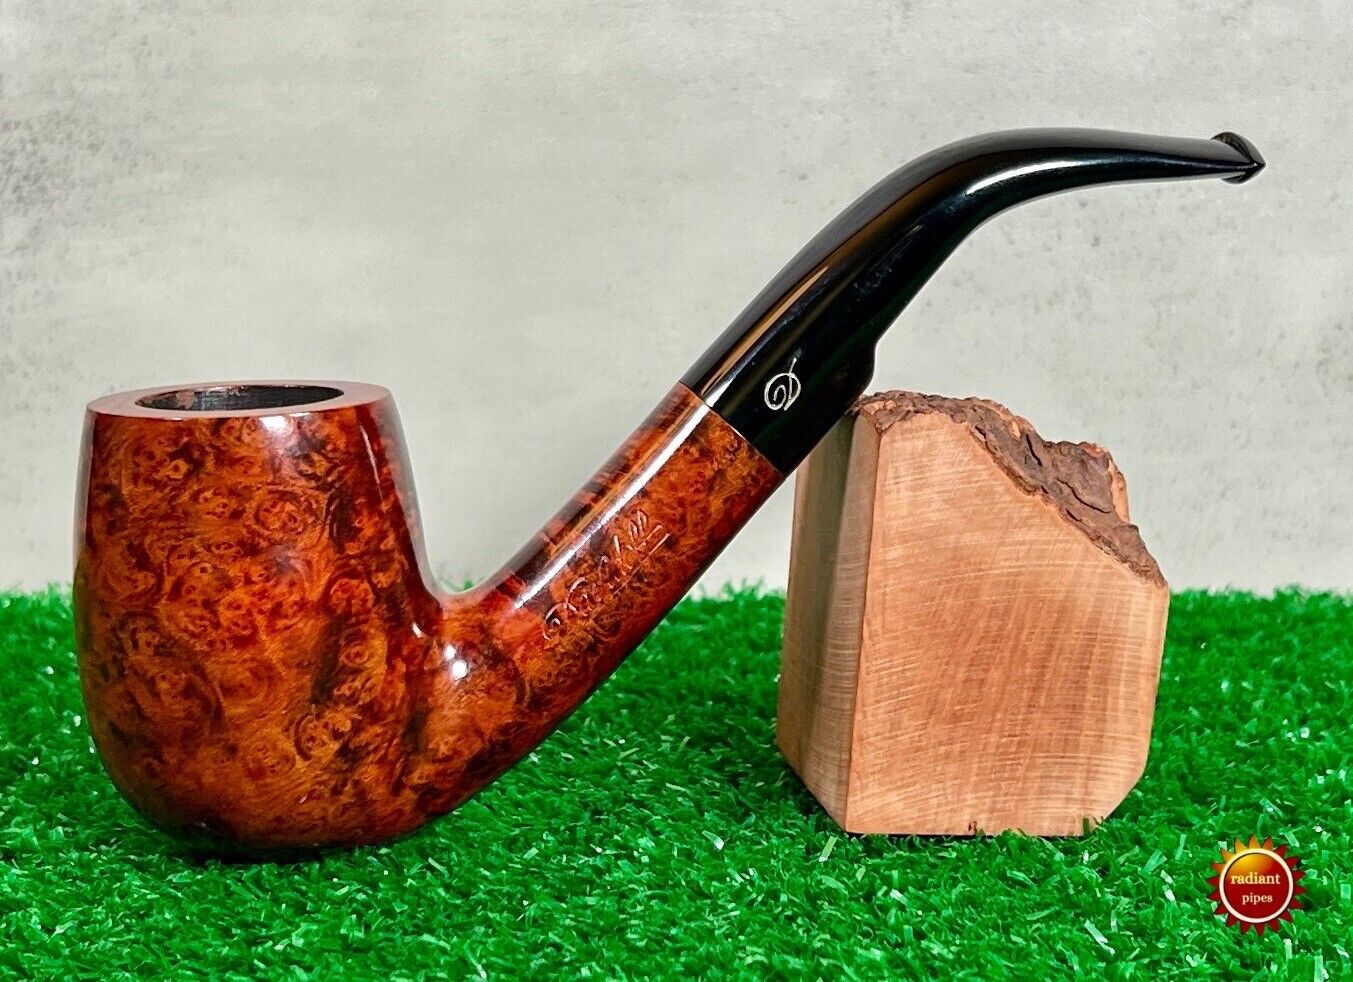 Rare & Beautiful Davidoff Estate Pipe, SMOKED 1-2x Only. Mint Condition. Clean.